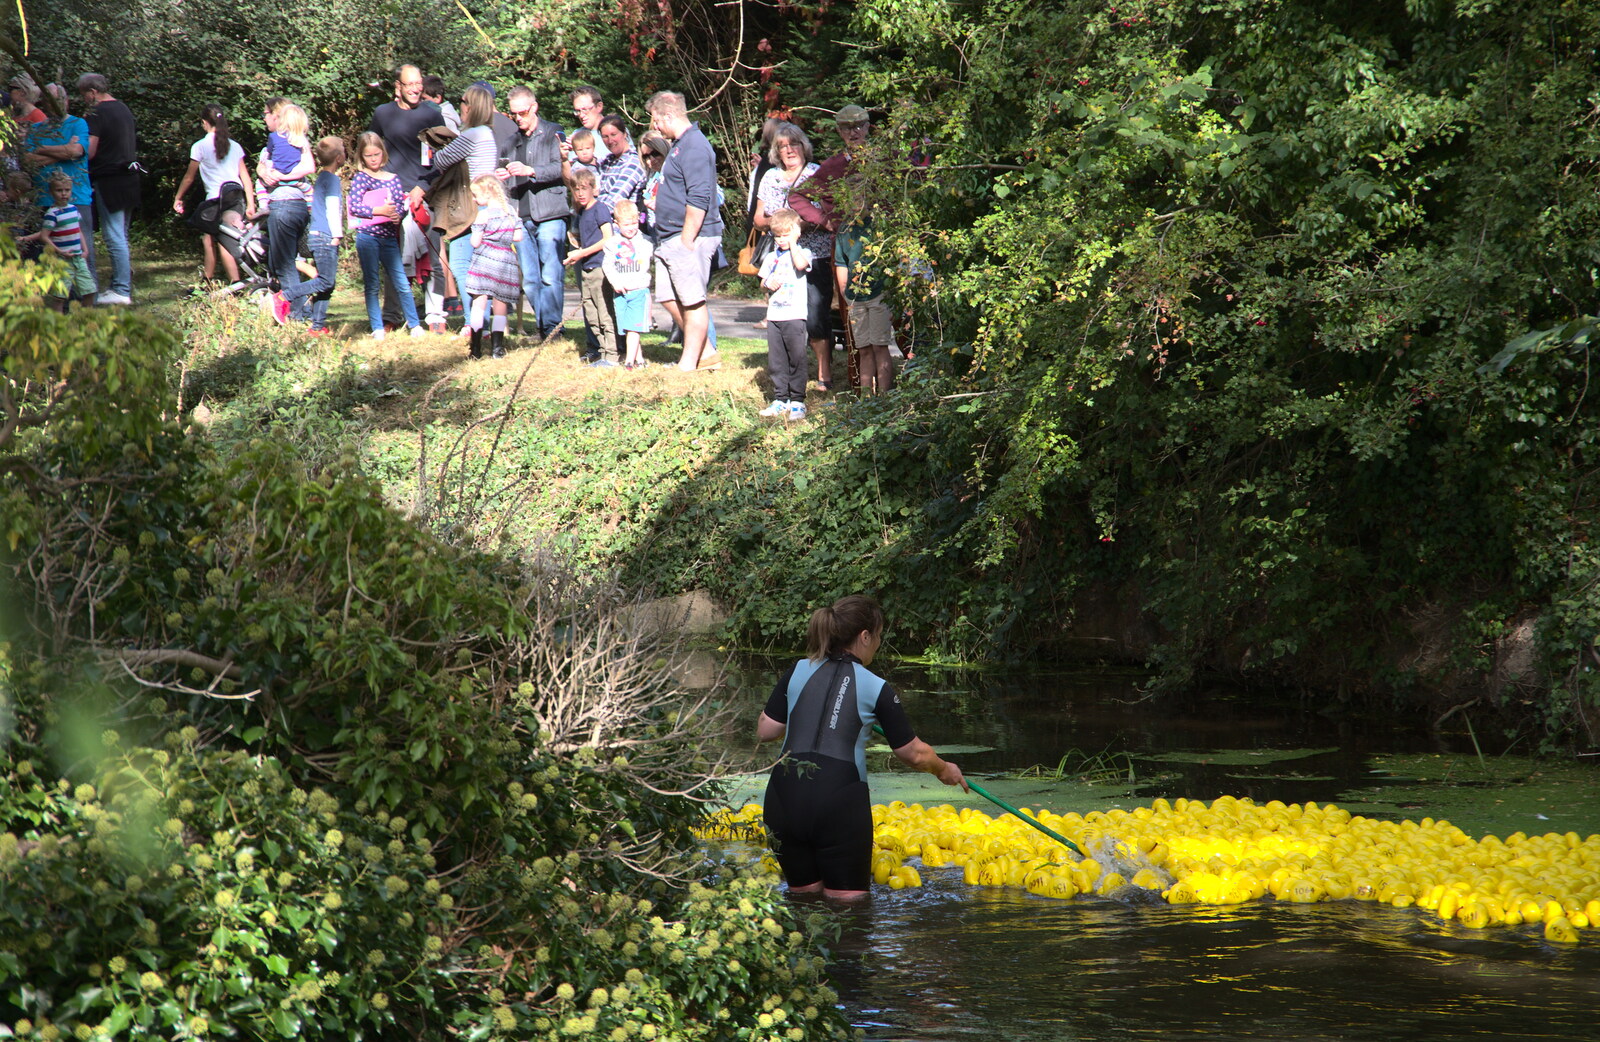 Gislingham Silver Band and the Duck Race, The Pennings, Eye, Suffolk - 29th September 2018: The ducks are assisted up the river